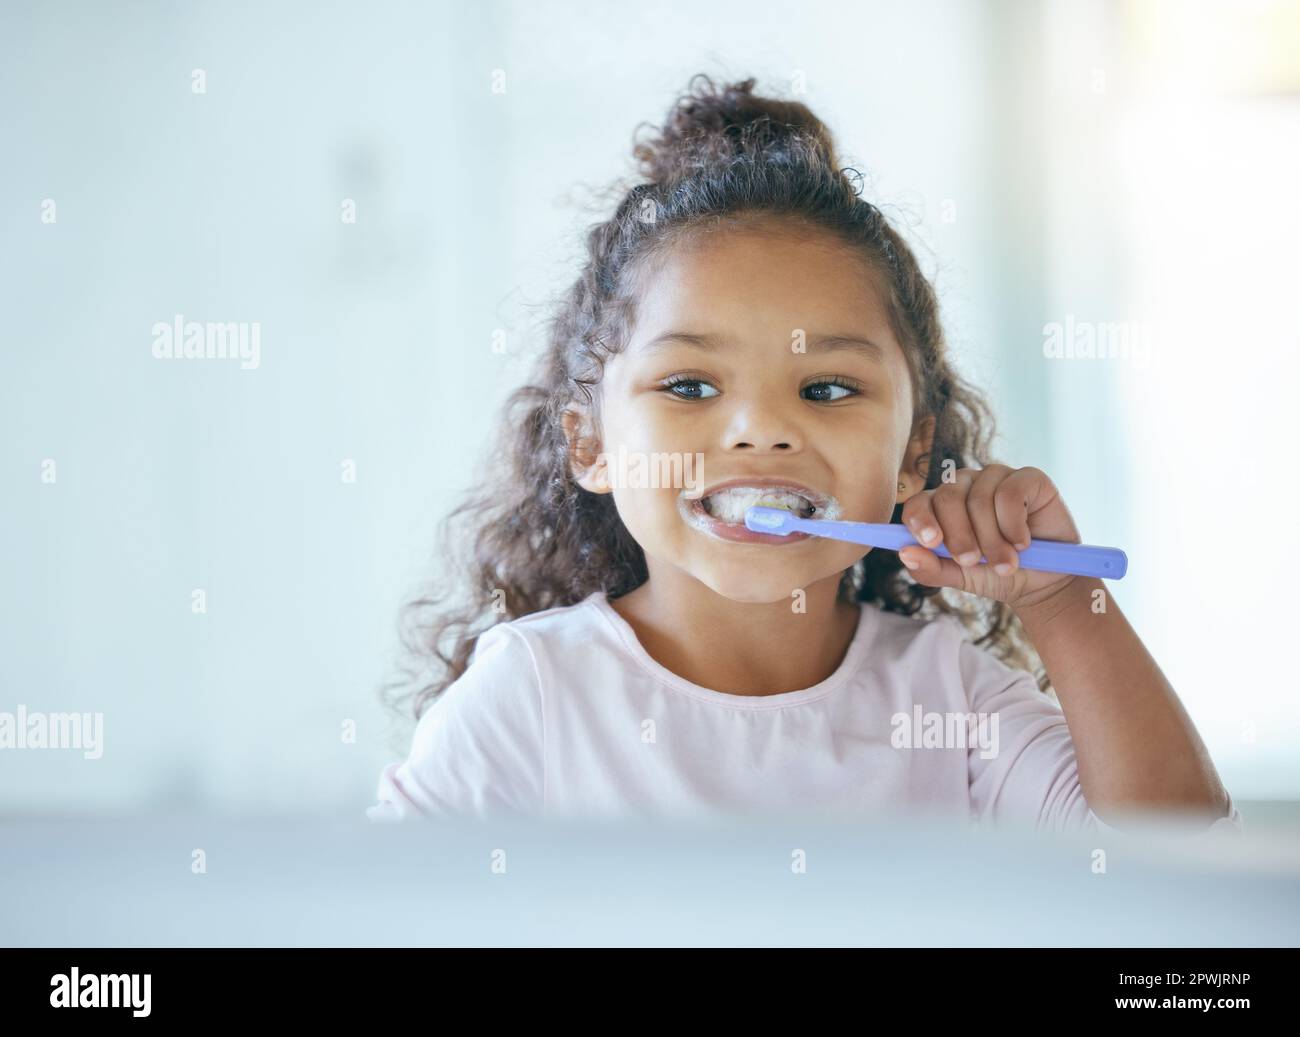 Taking good care of my teeth. a little girl brushing her teeth in a bathroom at home Stock Photo